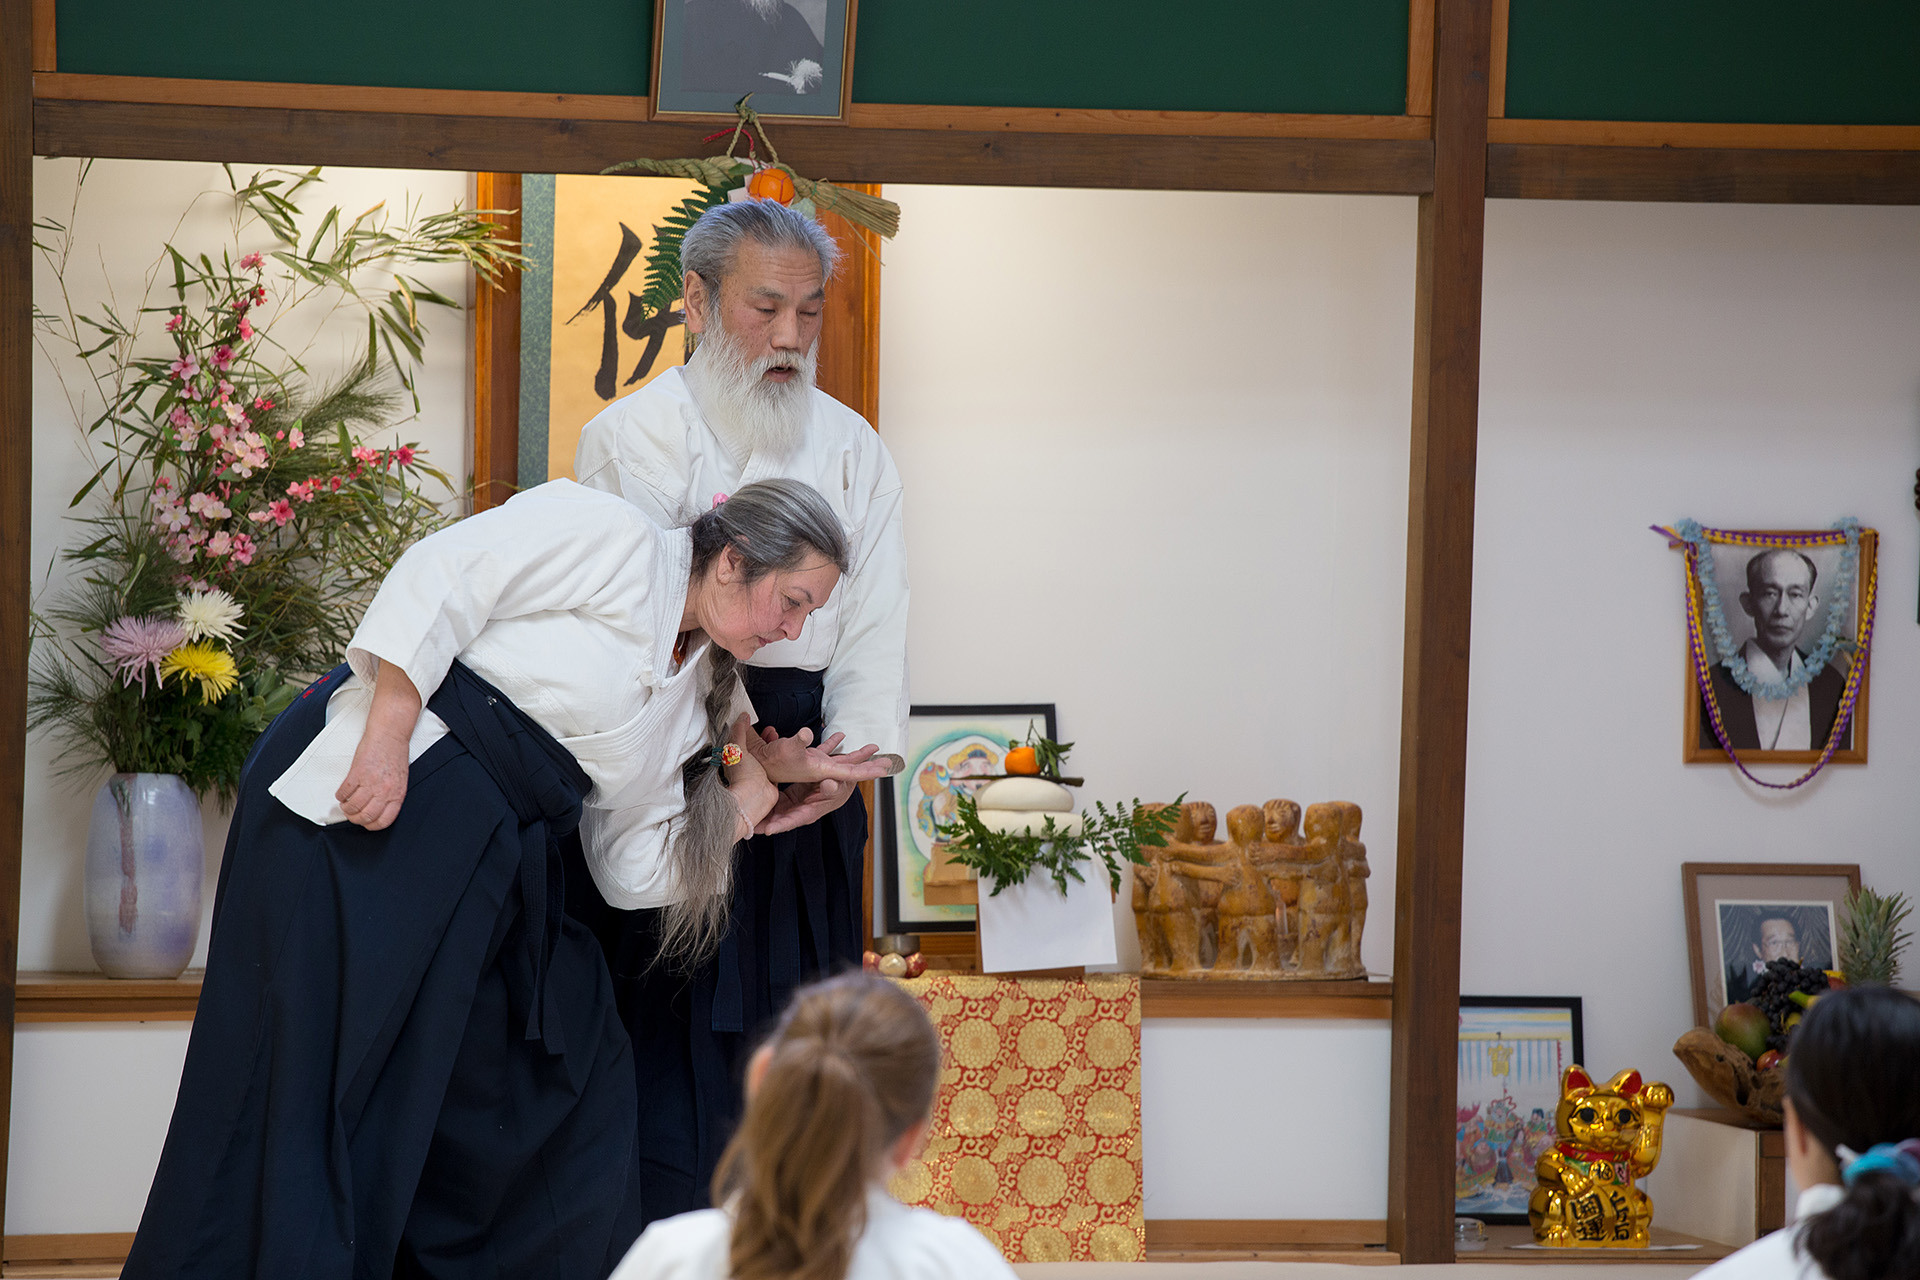 aikido is pic